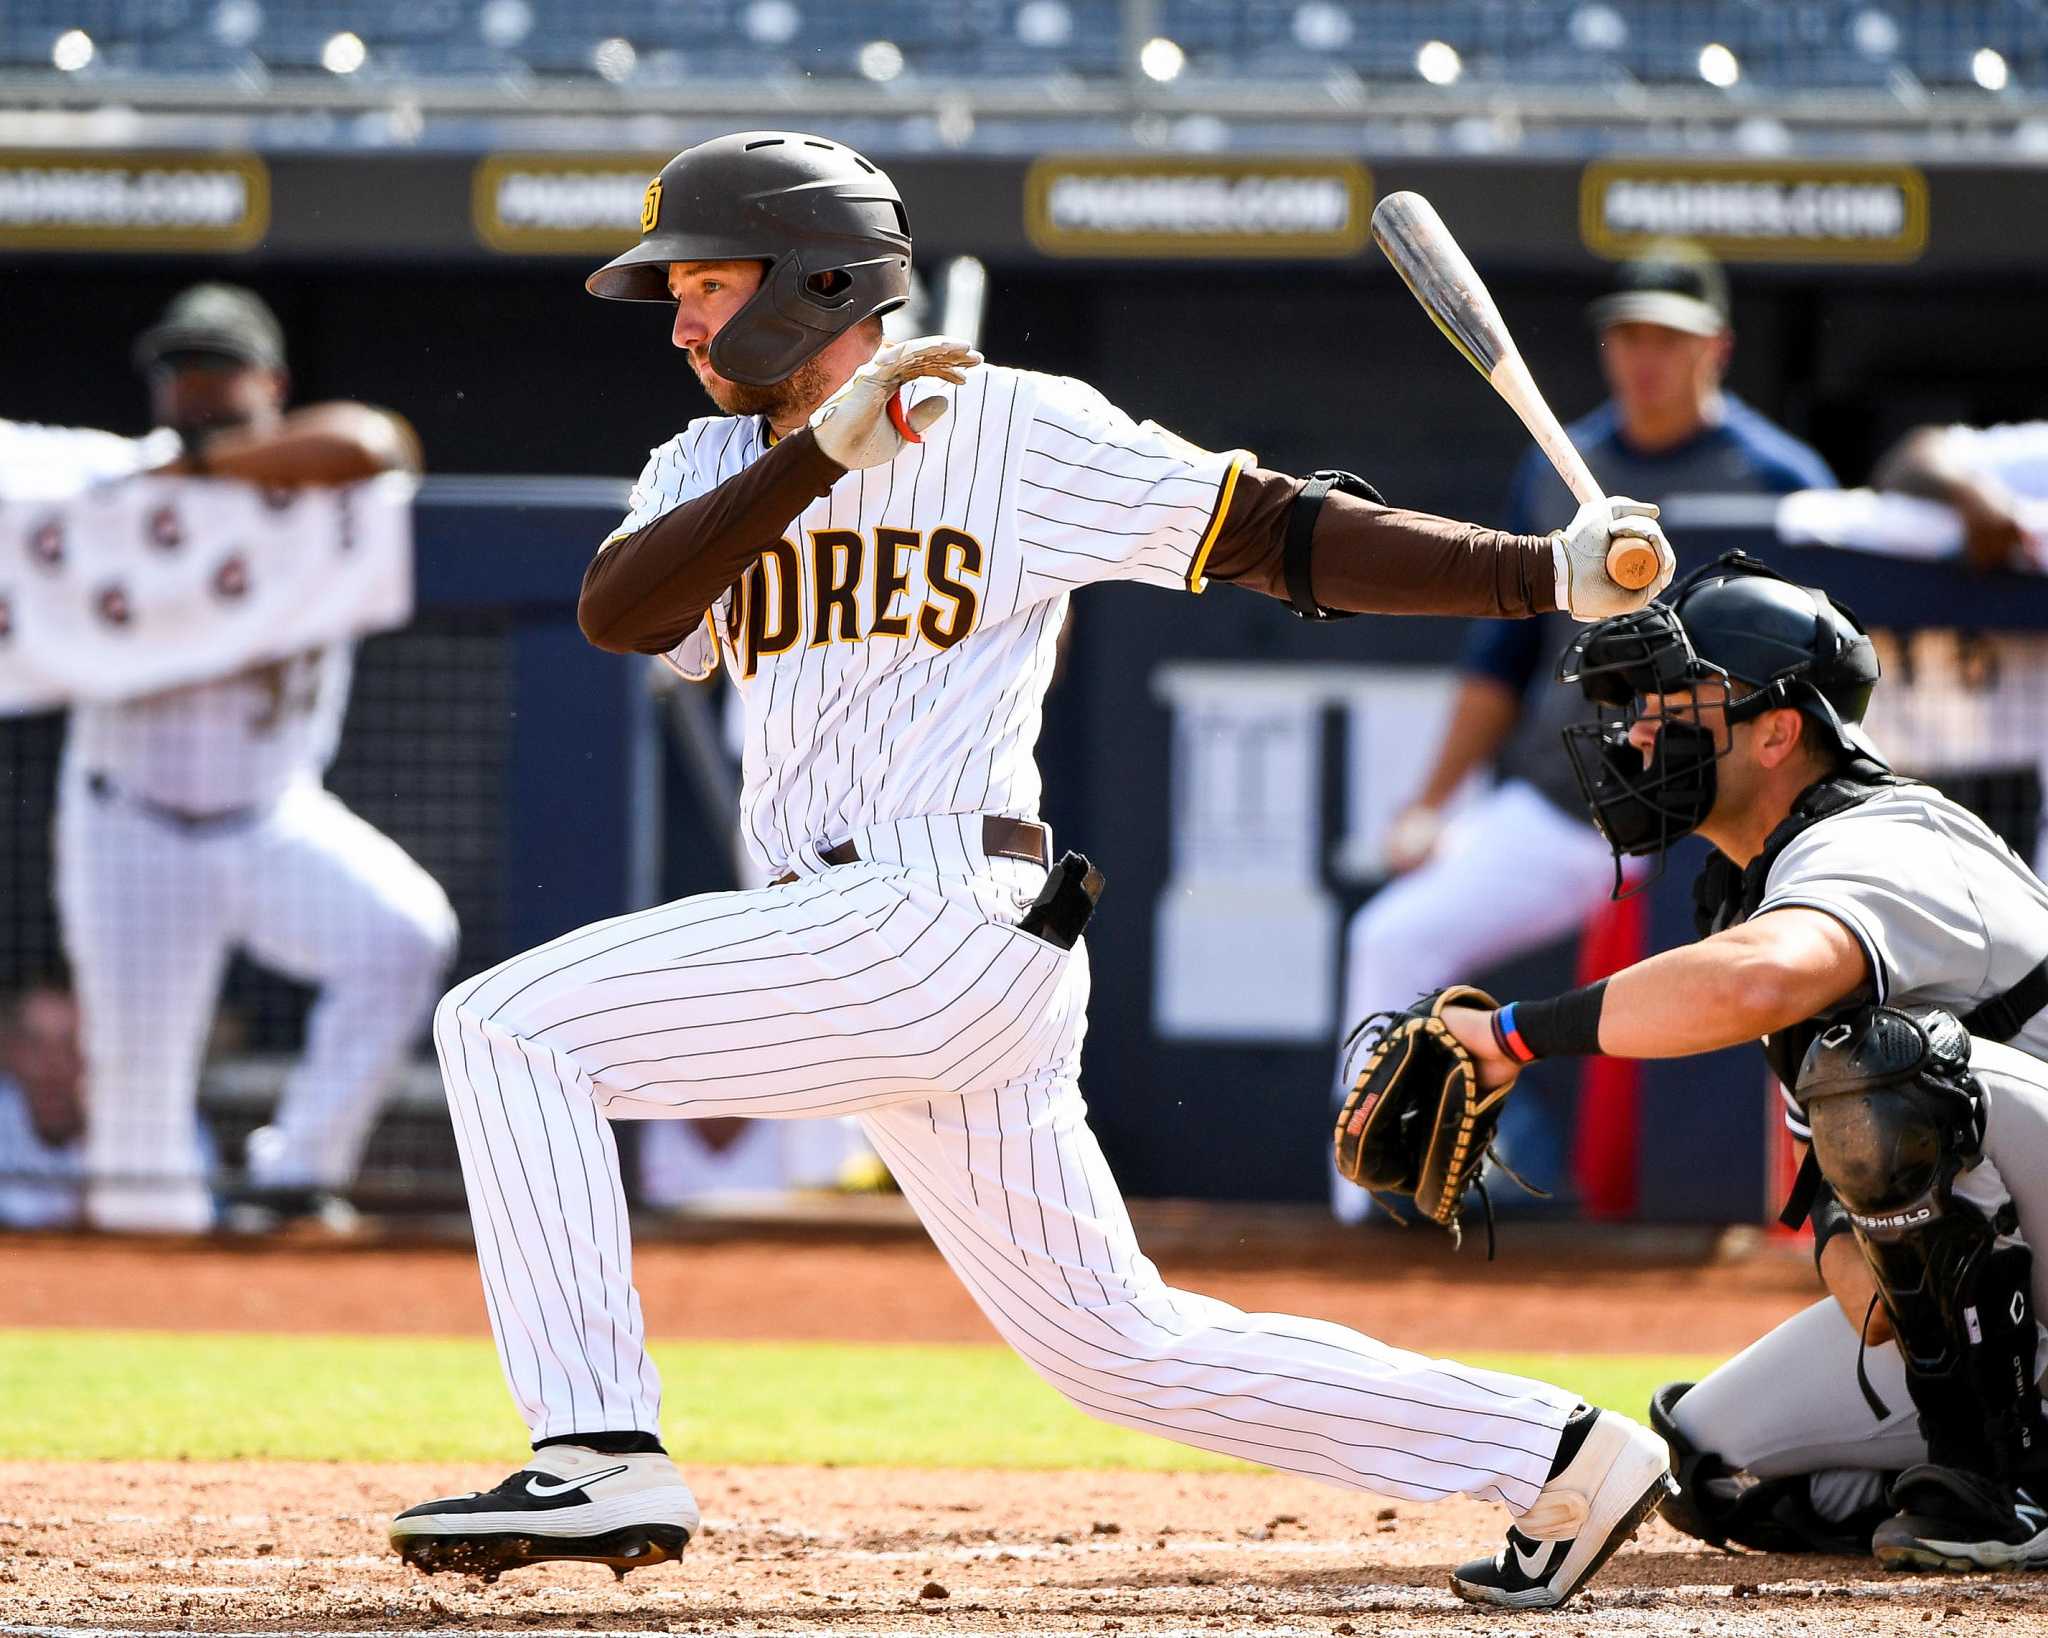 San Diego Padres pro and El Paso native comes home to play